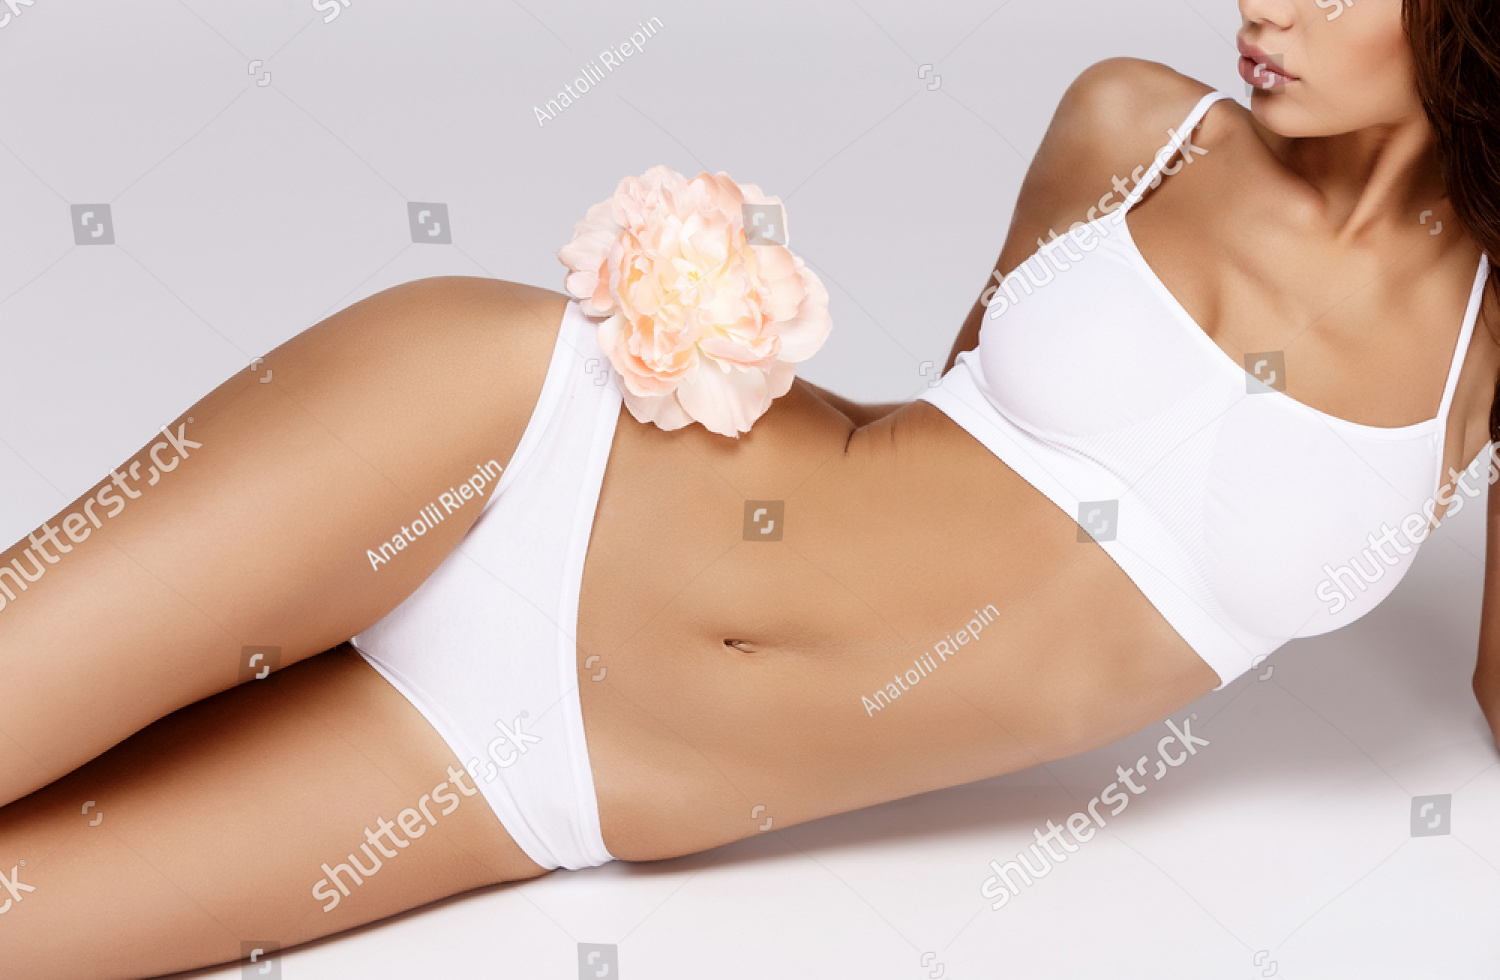 stock-photo-slim-tanned-woman-s-body-over-gray-background-401725924